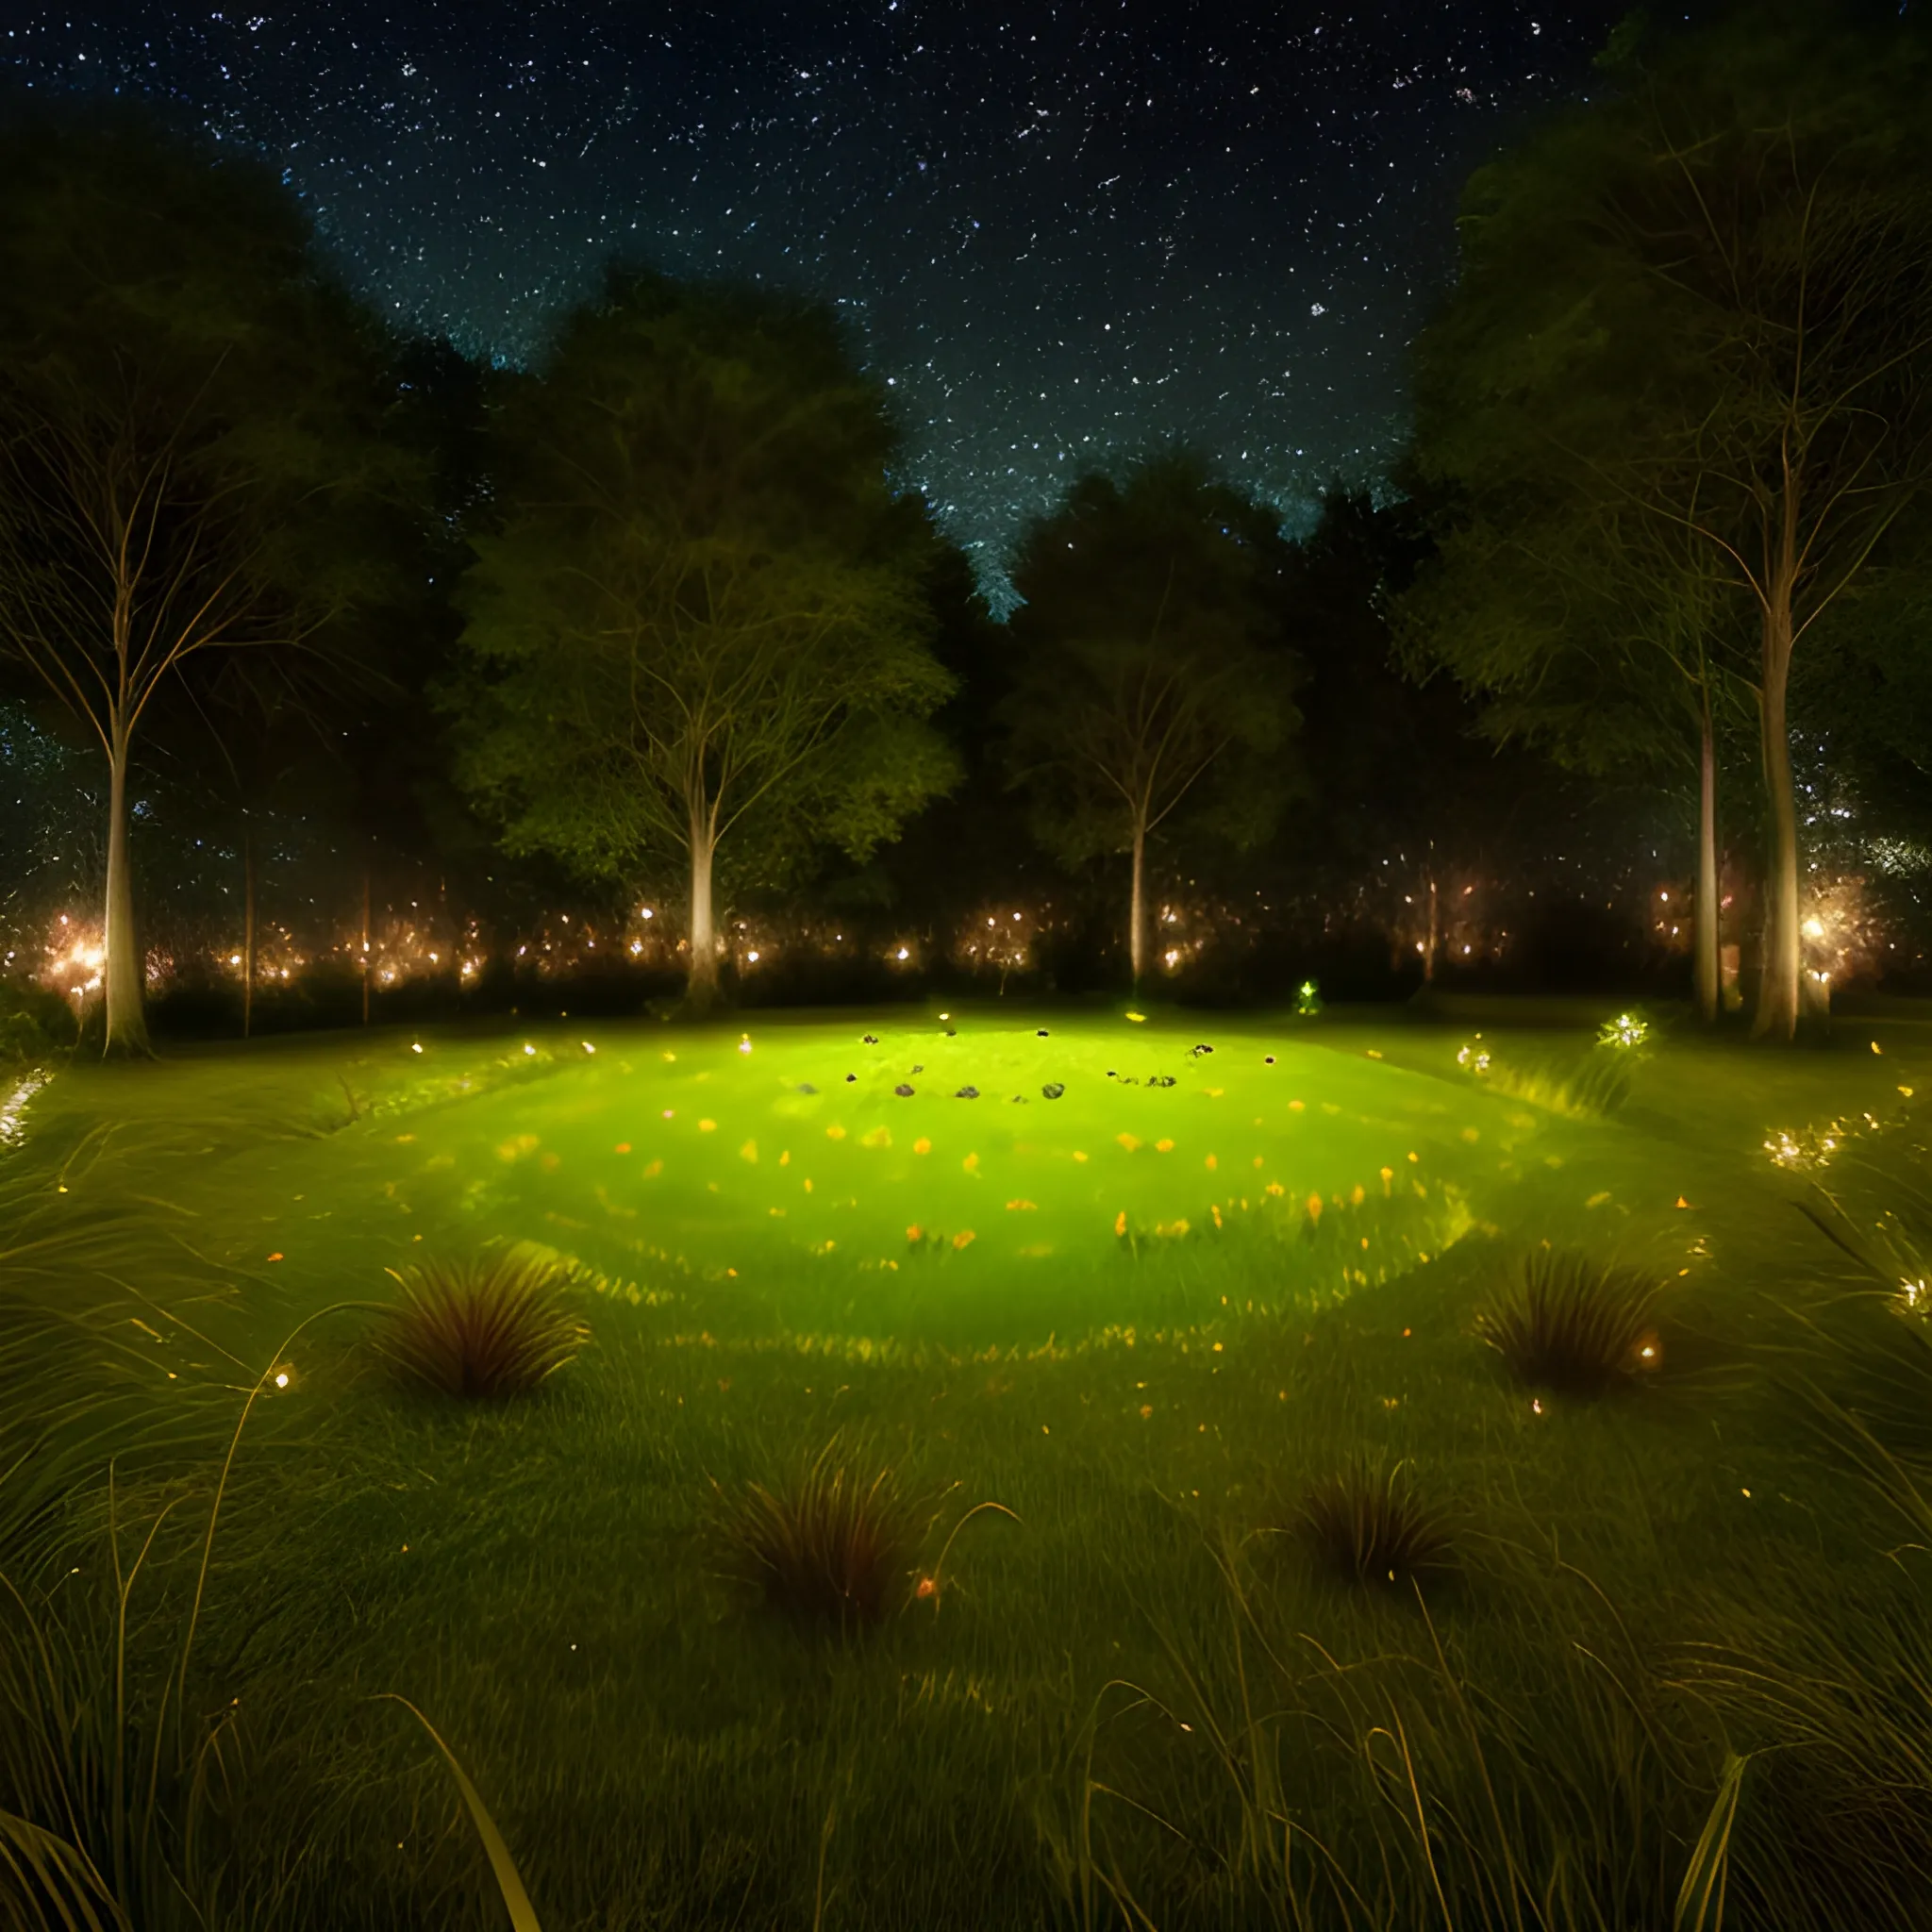 A magical grassy ground at night